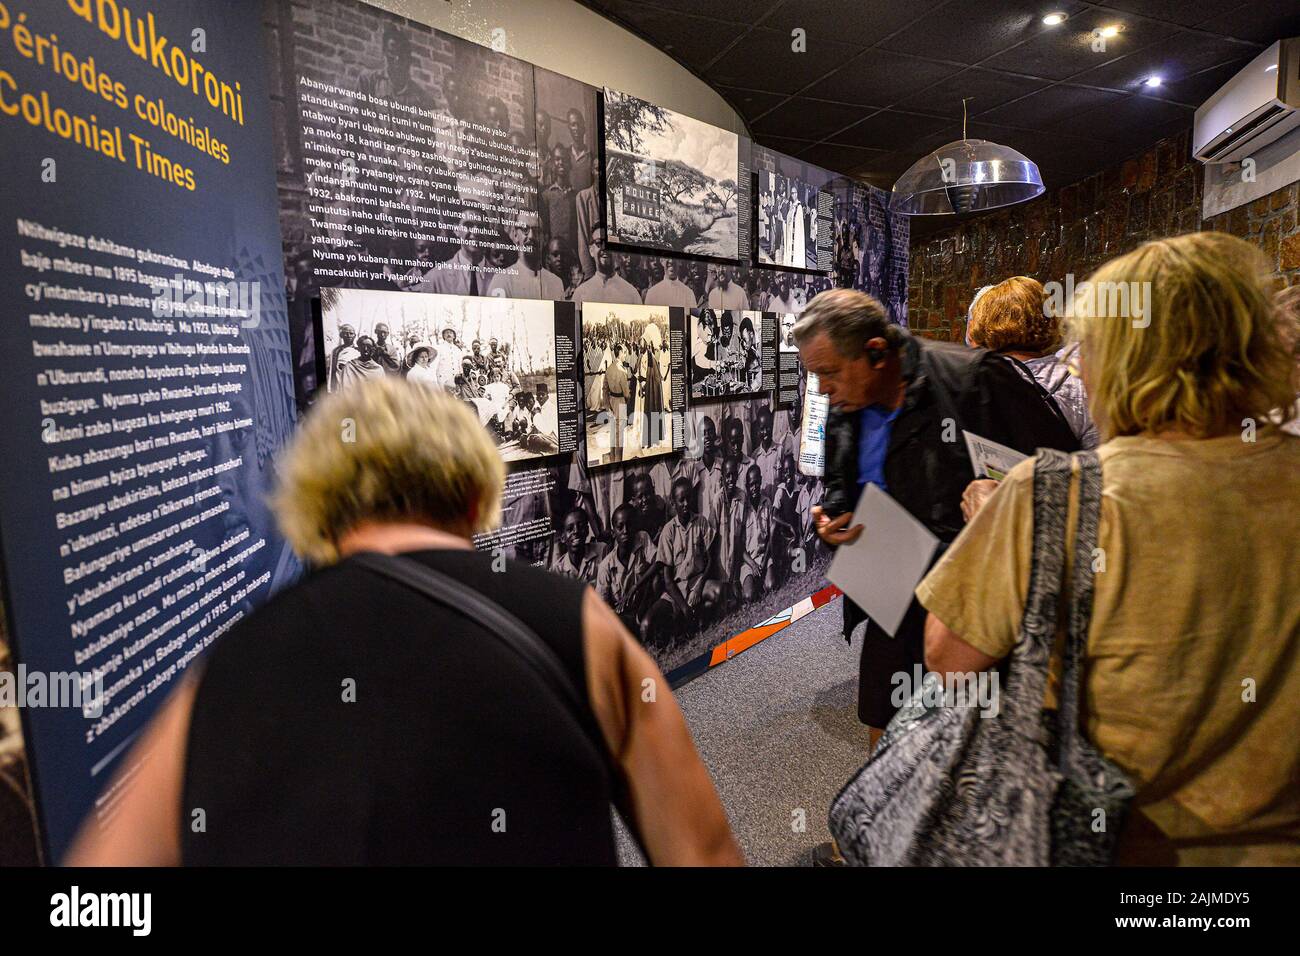 Kigali, Rwanda - September 2019: Tourists visiting the National Memorial to the victims of Genocide on September 25, 2019 in Kigali, Rwanda. Stock Photo